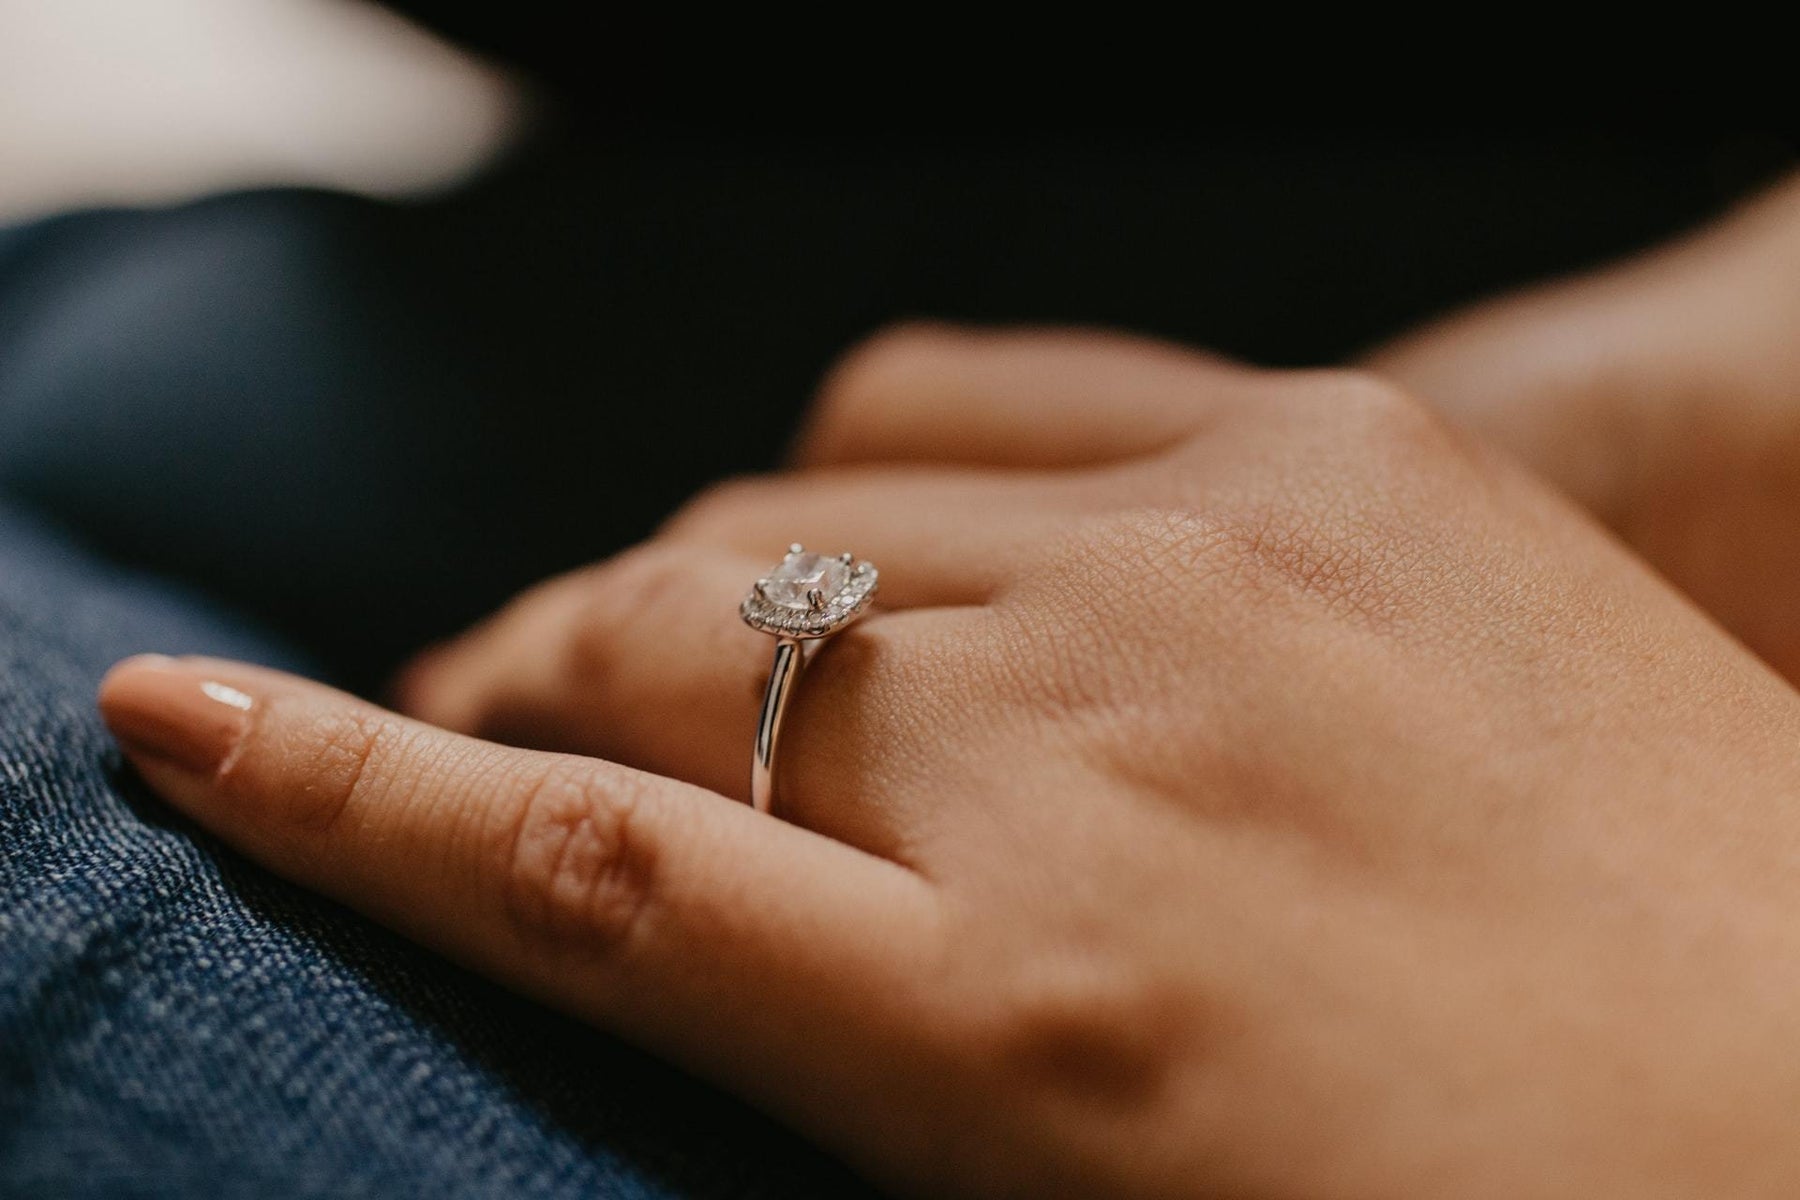 Lab grown diamond rings make your hand more attractive